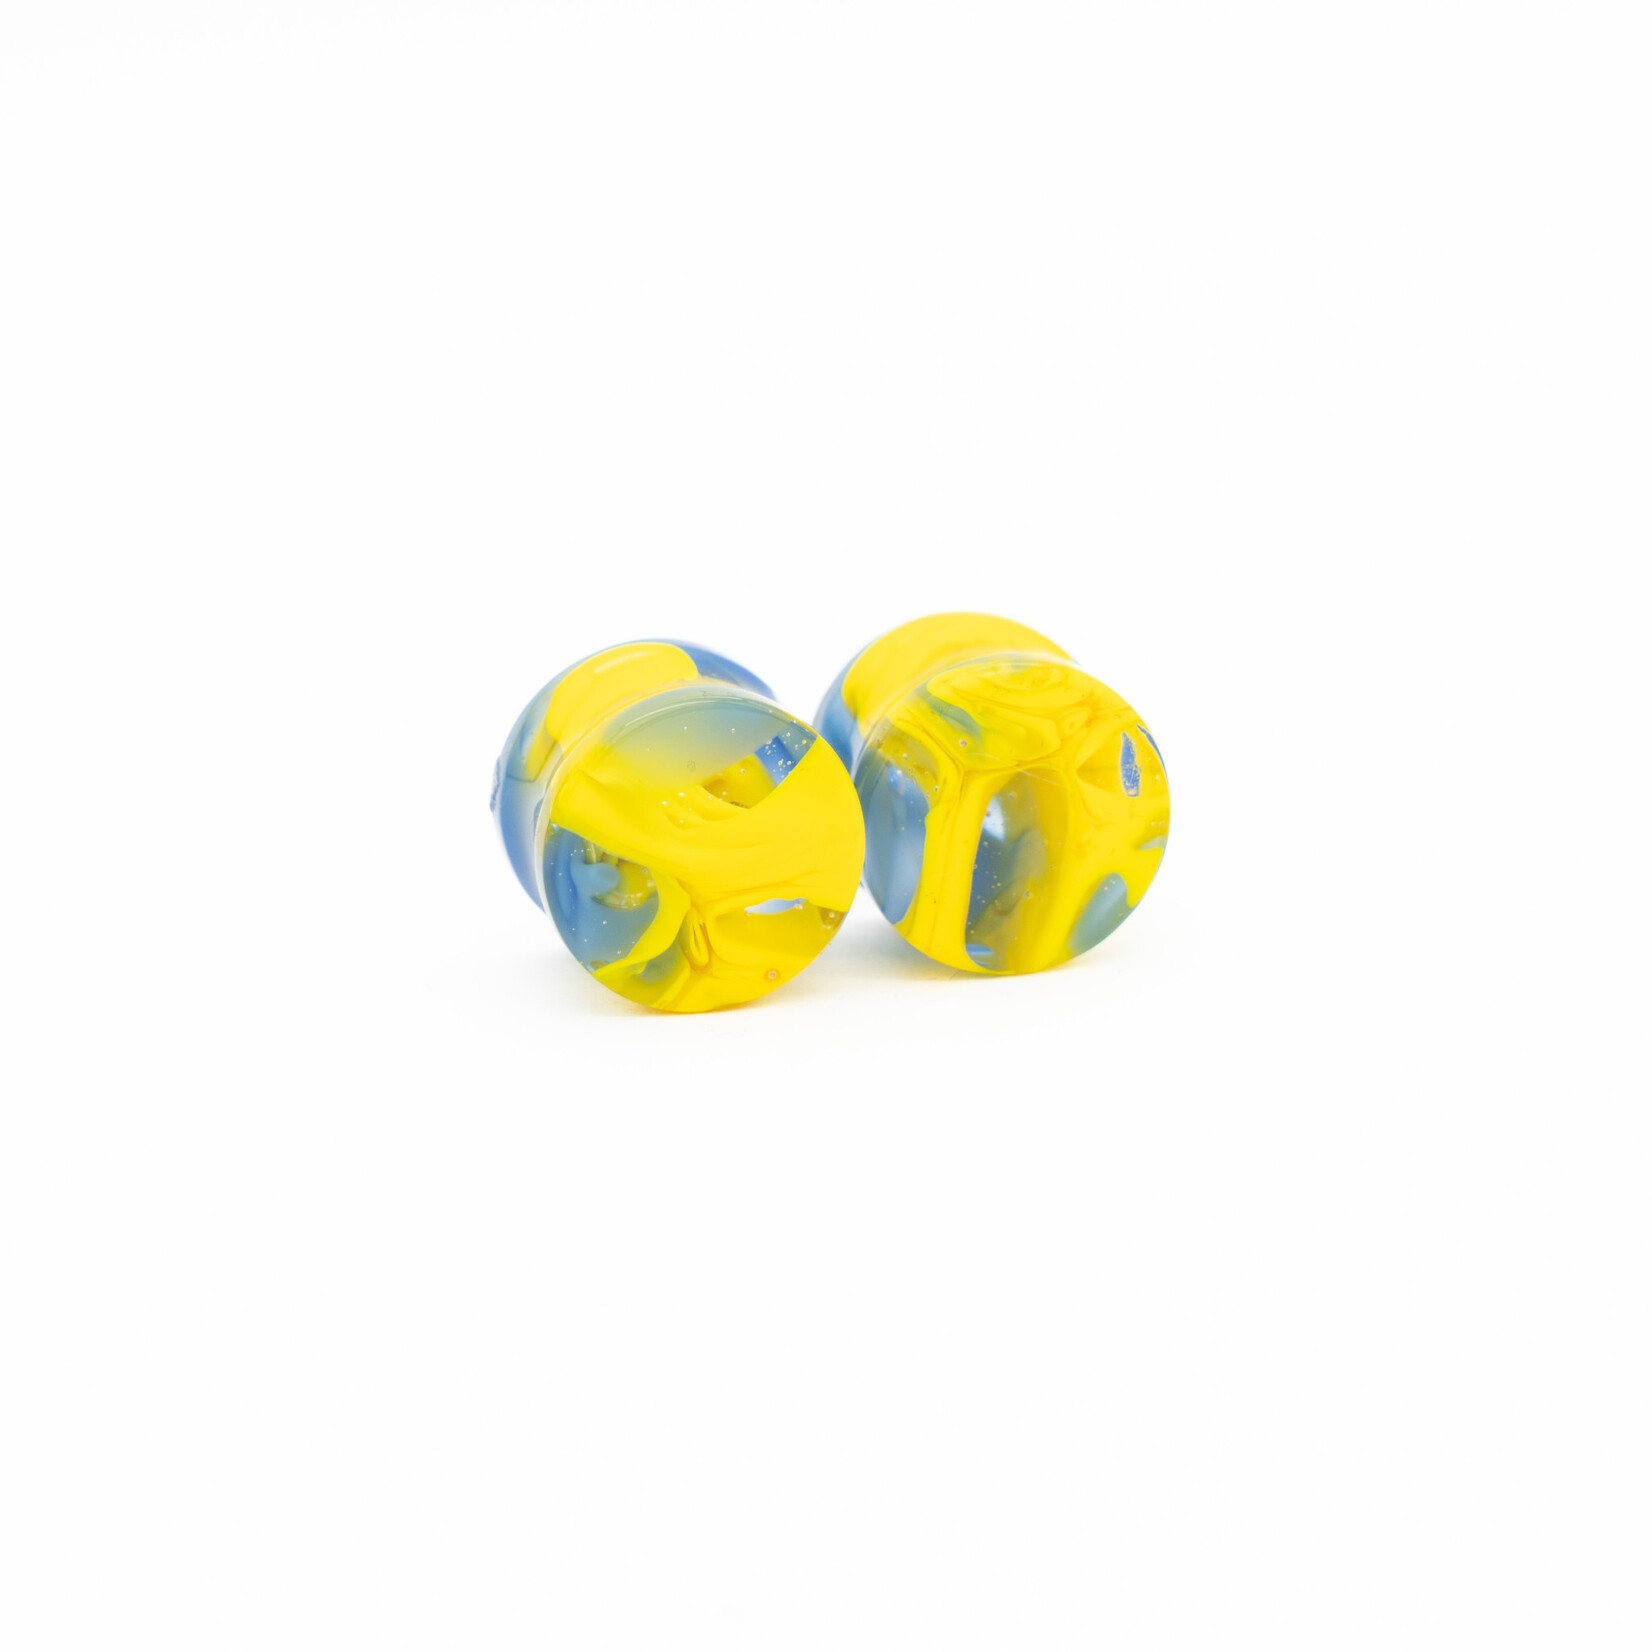 Gorilla Glass Double Flare (DF) Glass Plugs - Power (Pair)